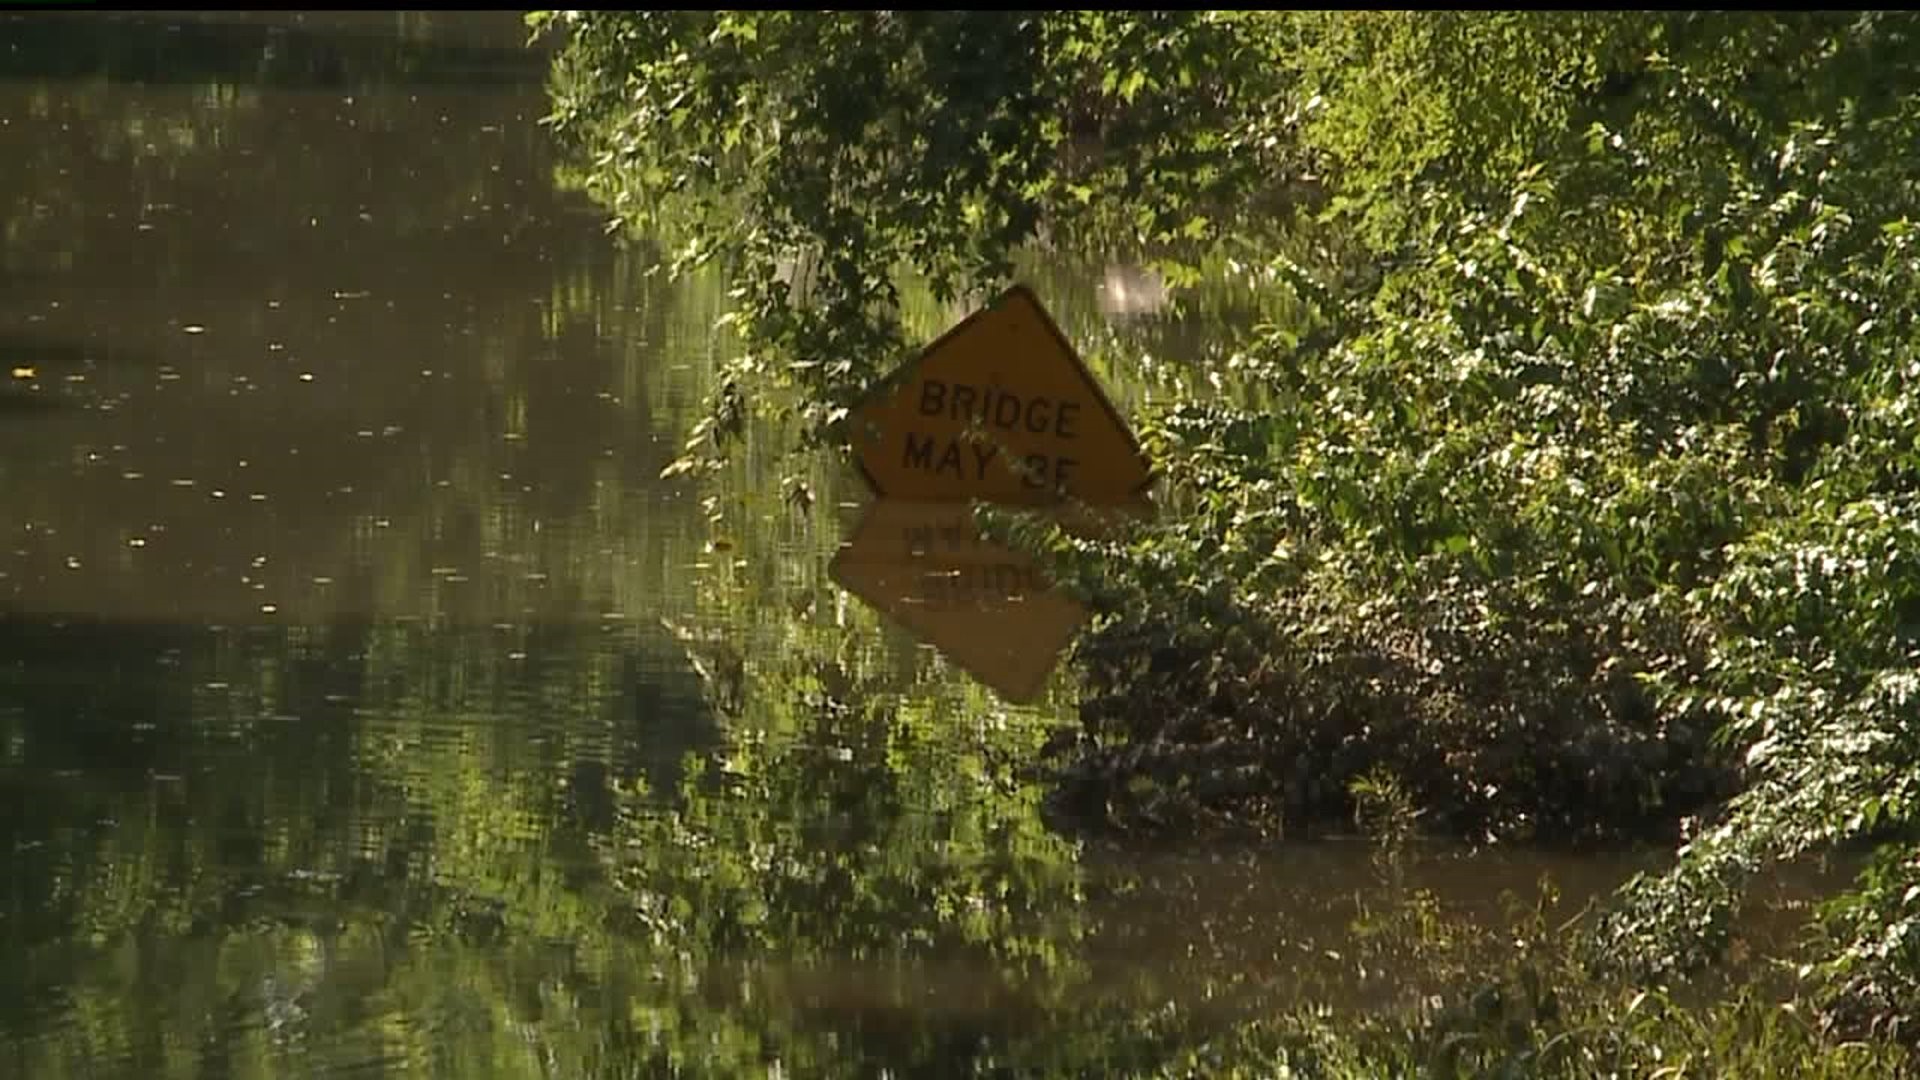 Parts of York Co. are still underwater